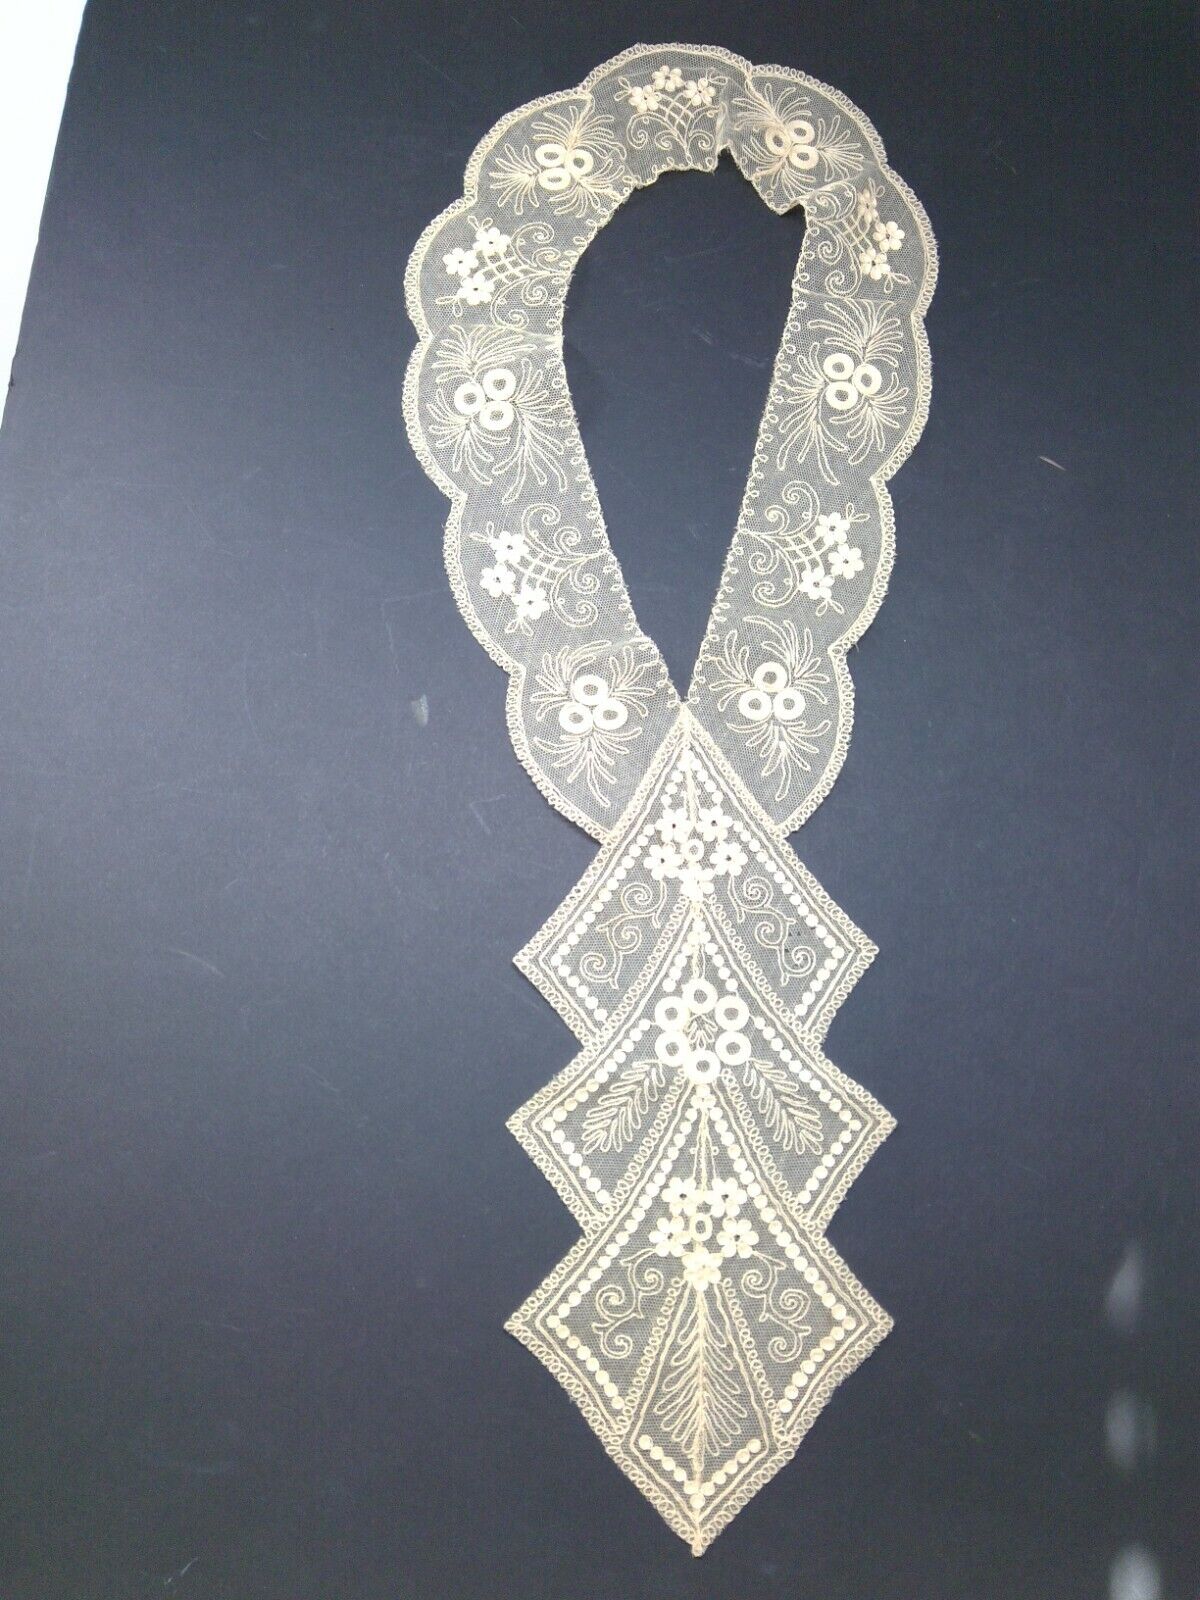 Stunning Vintage Lace Collar Finely Made